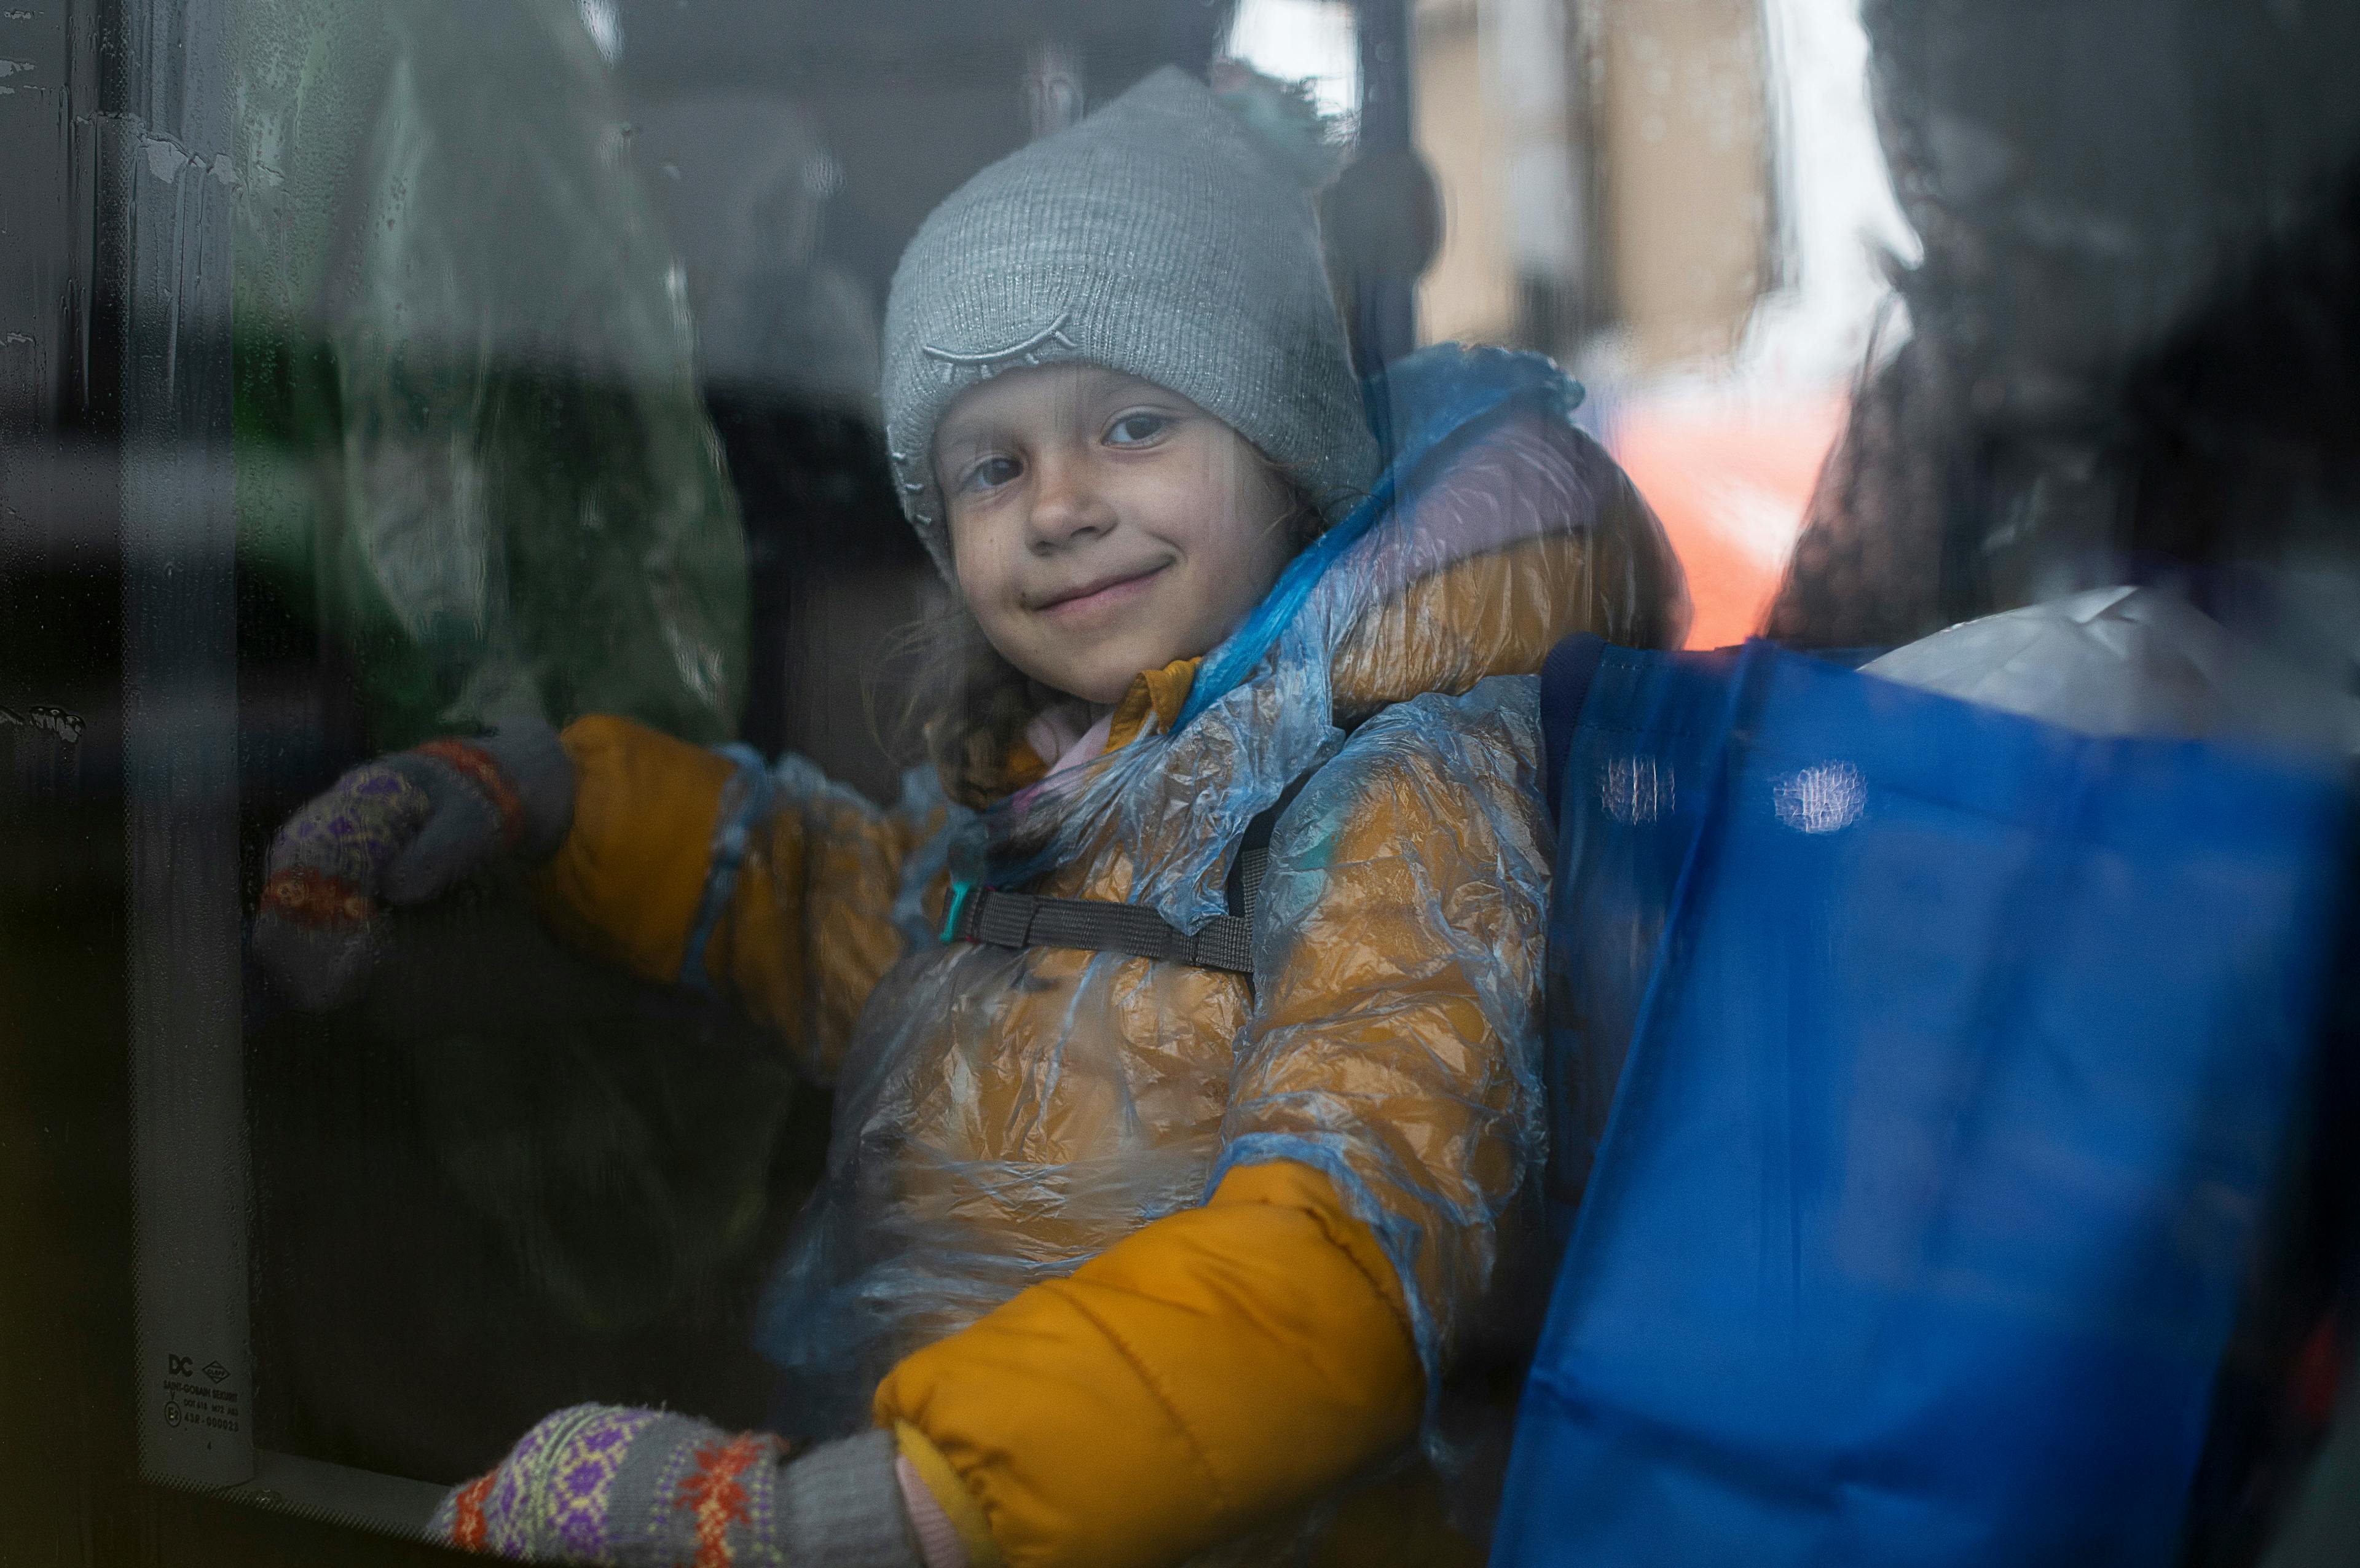 Little girl smiling from a bus in the rain